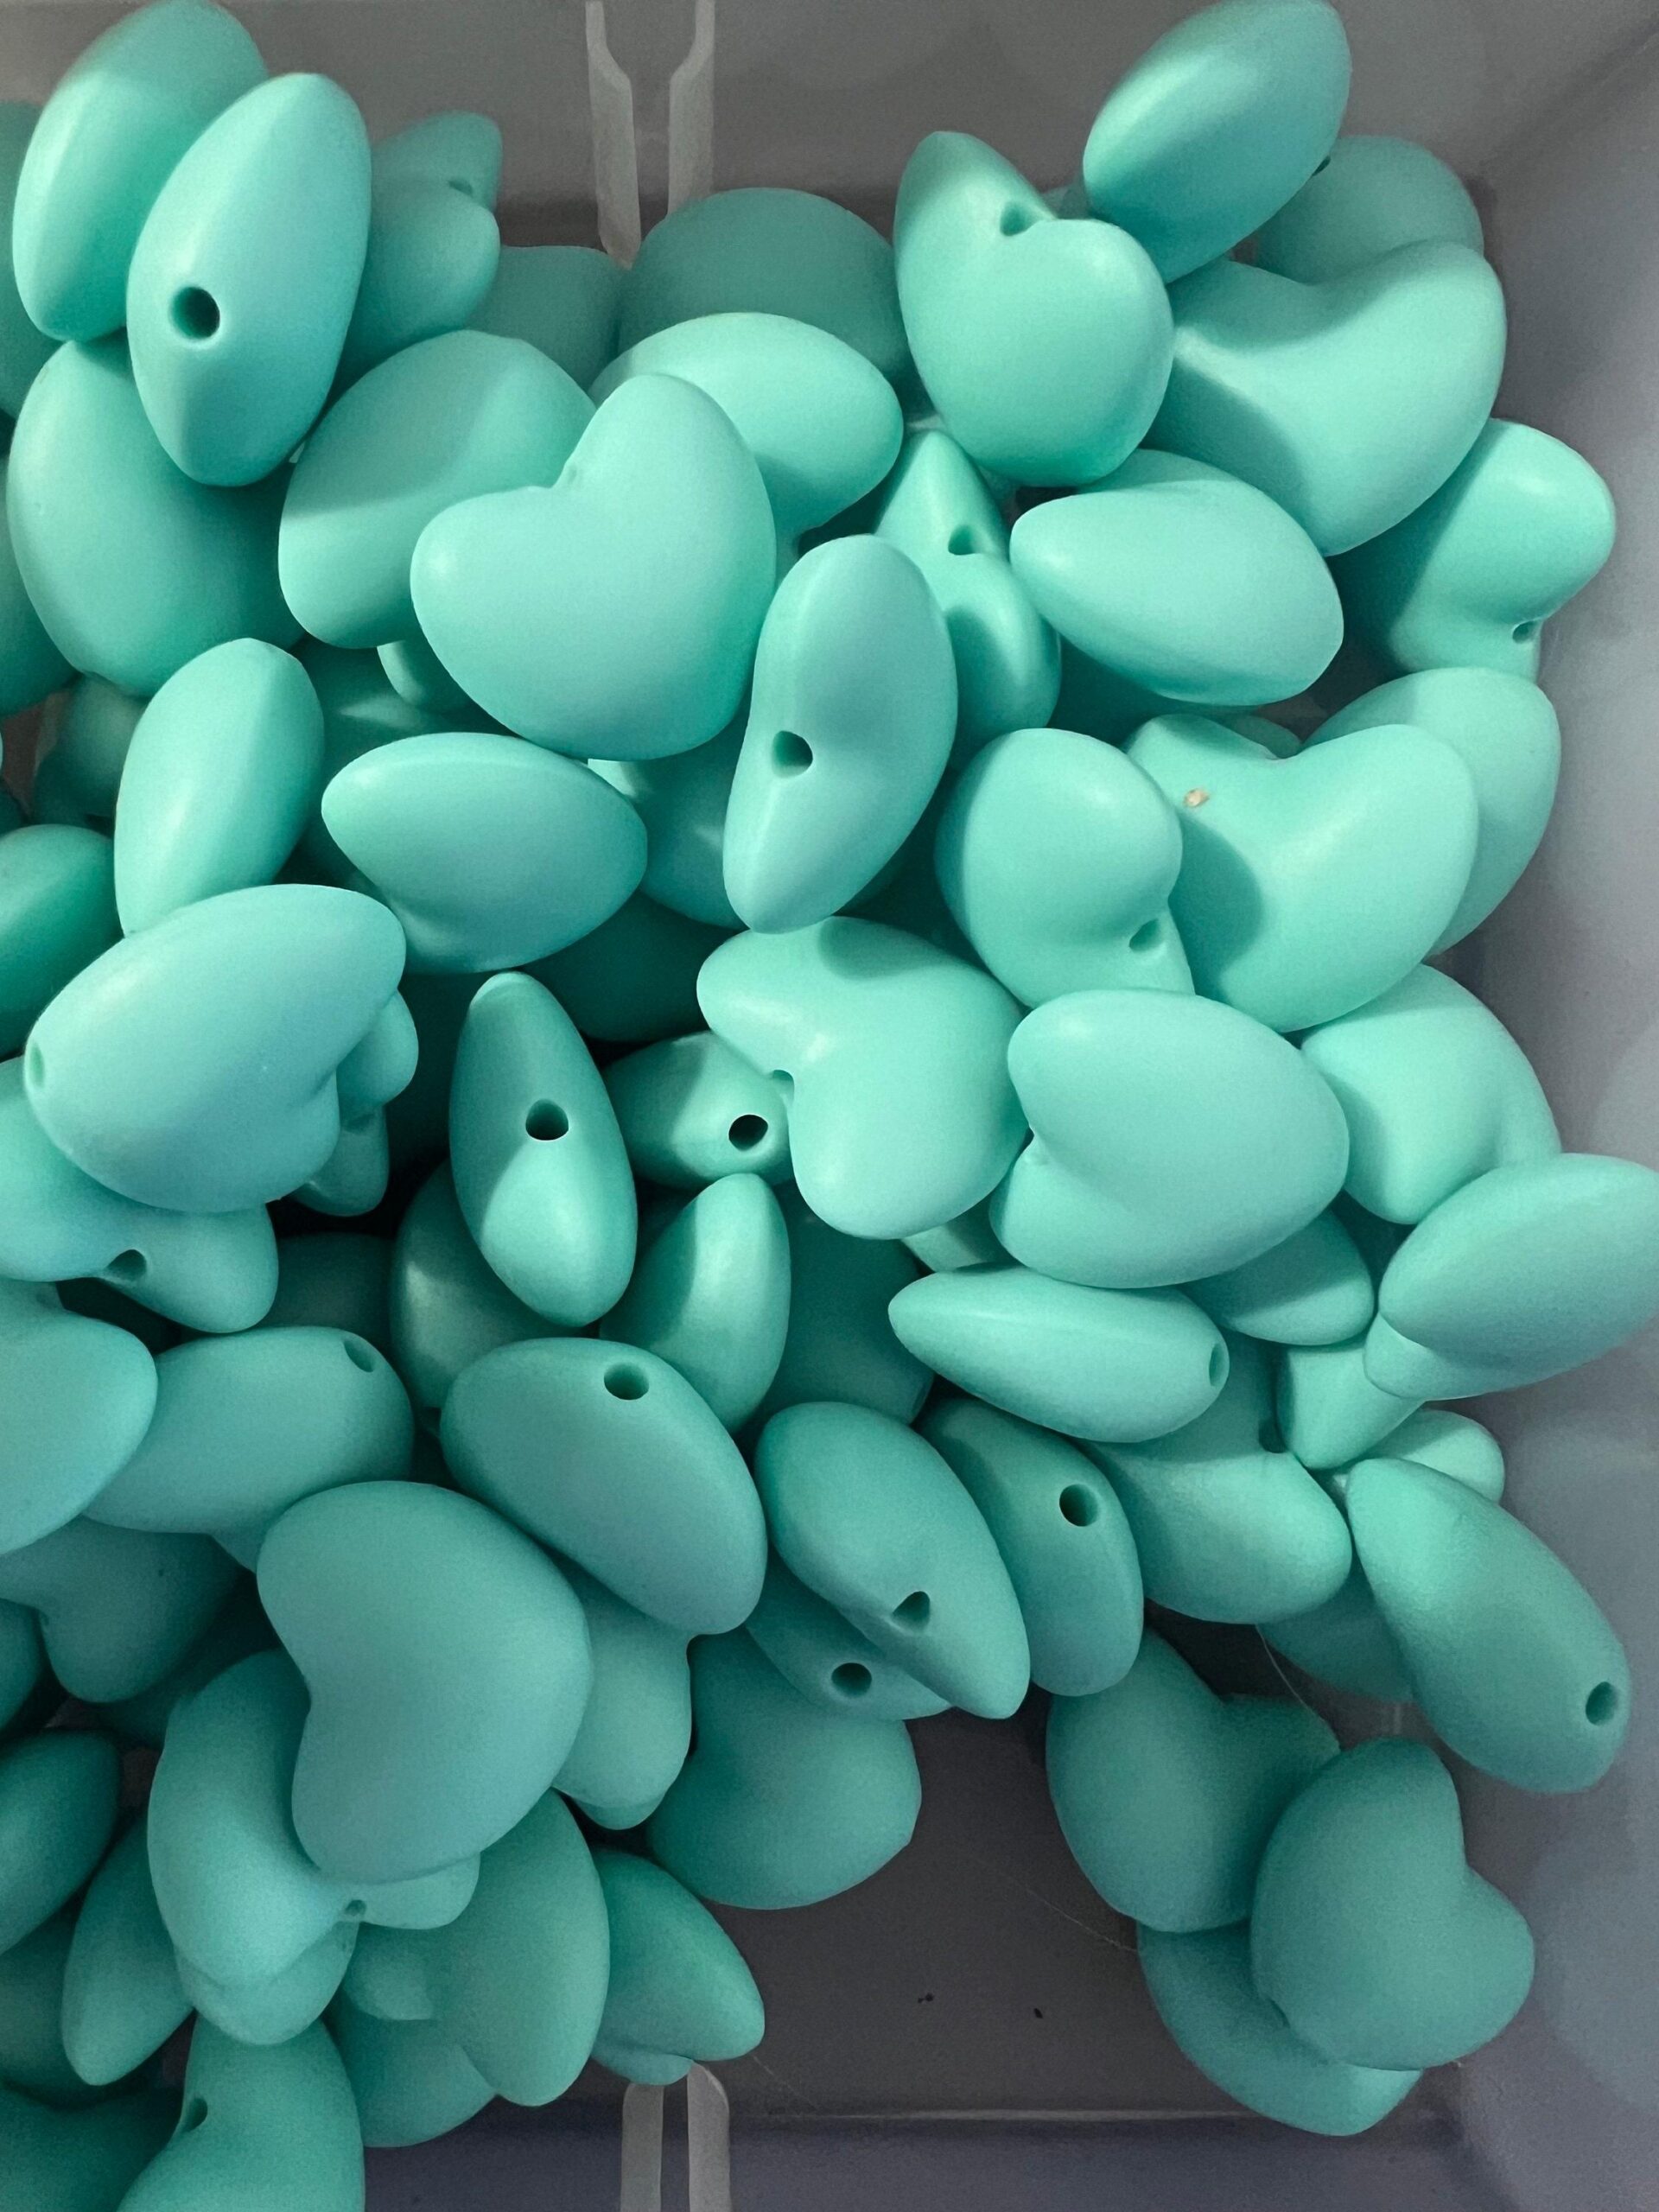 Silicone Teal Heart Beads